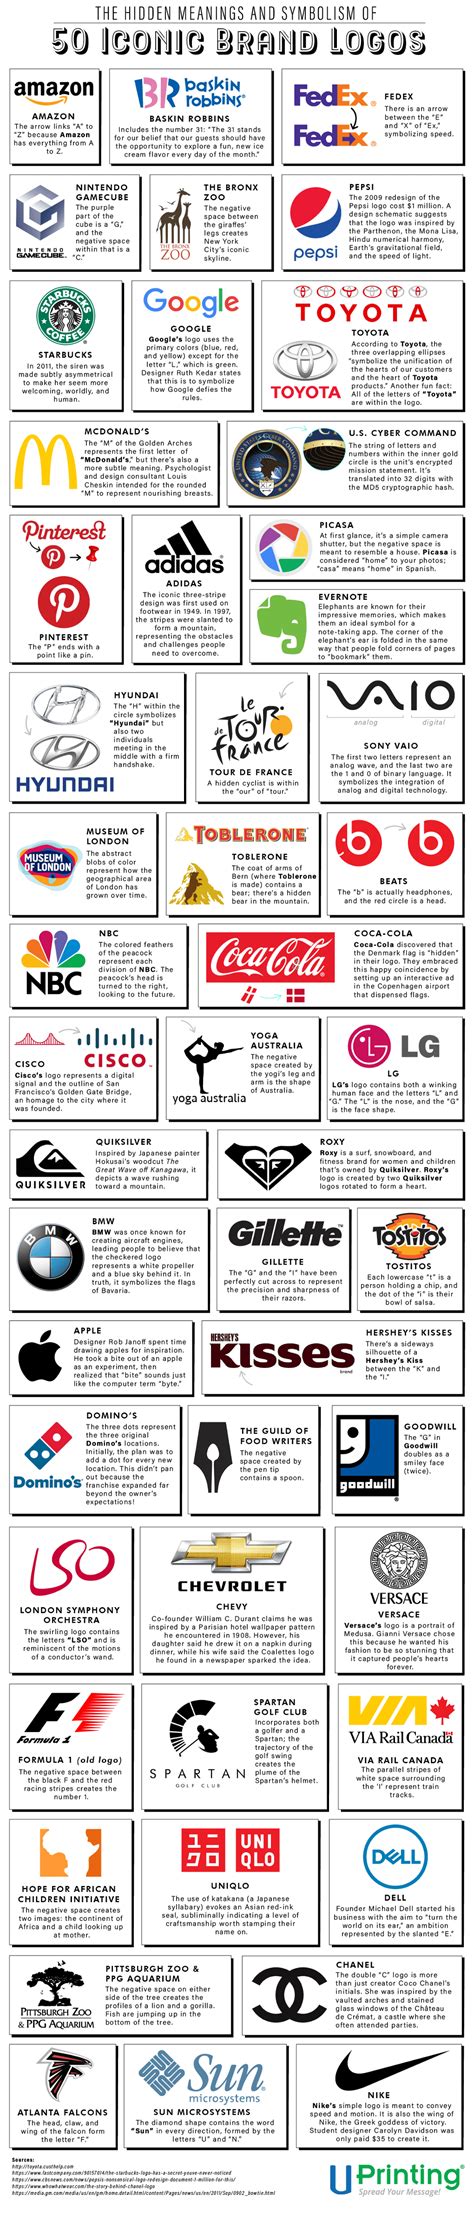 The Hidden Meanings and Symbolism of 50 Iconic Brand Logos | Custom Printing Services | UPrinting